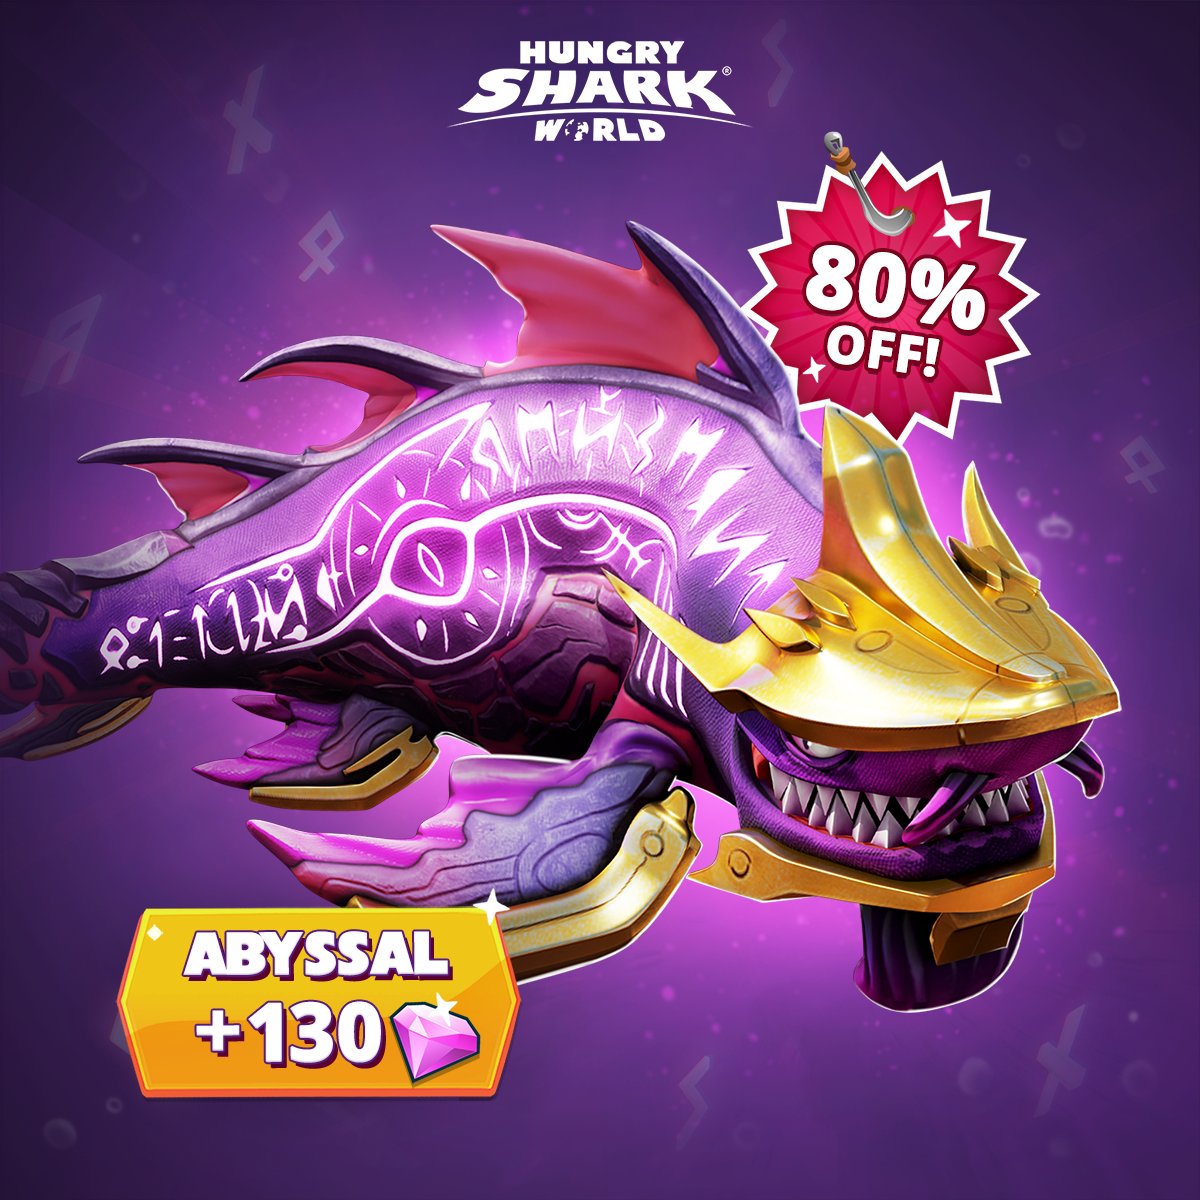 Dive into the abyss and unleash the primal power of the Abyssal Shark! 🦈 Only for today, get an 80% discount on unlocking this enigmatic predator to explore the ocean’s darkest depths! 🌊 #HSW #HungrySharkWorld